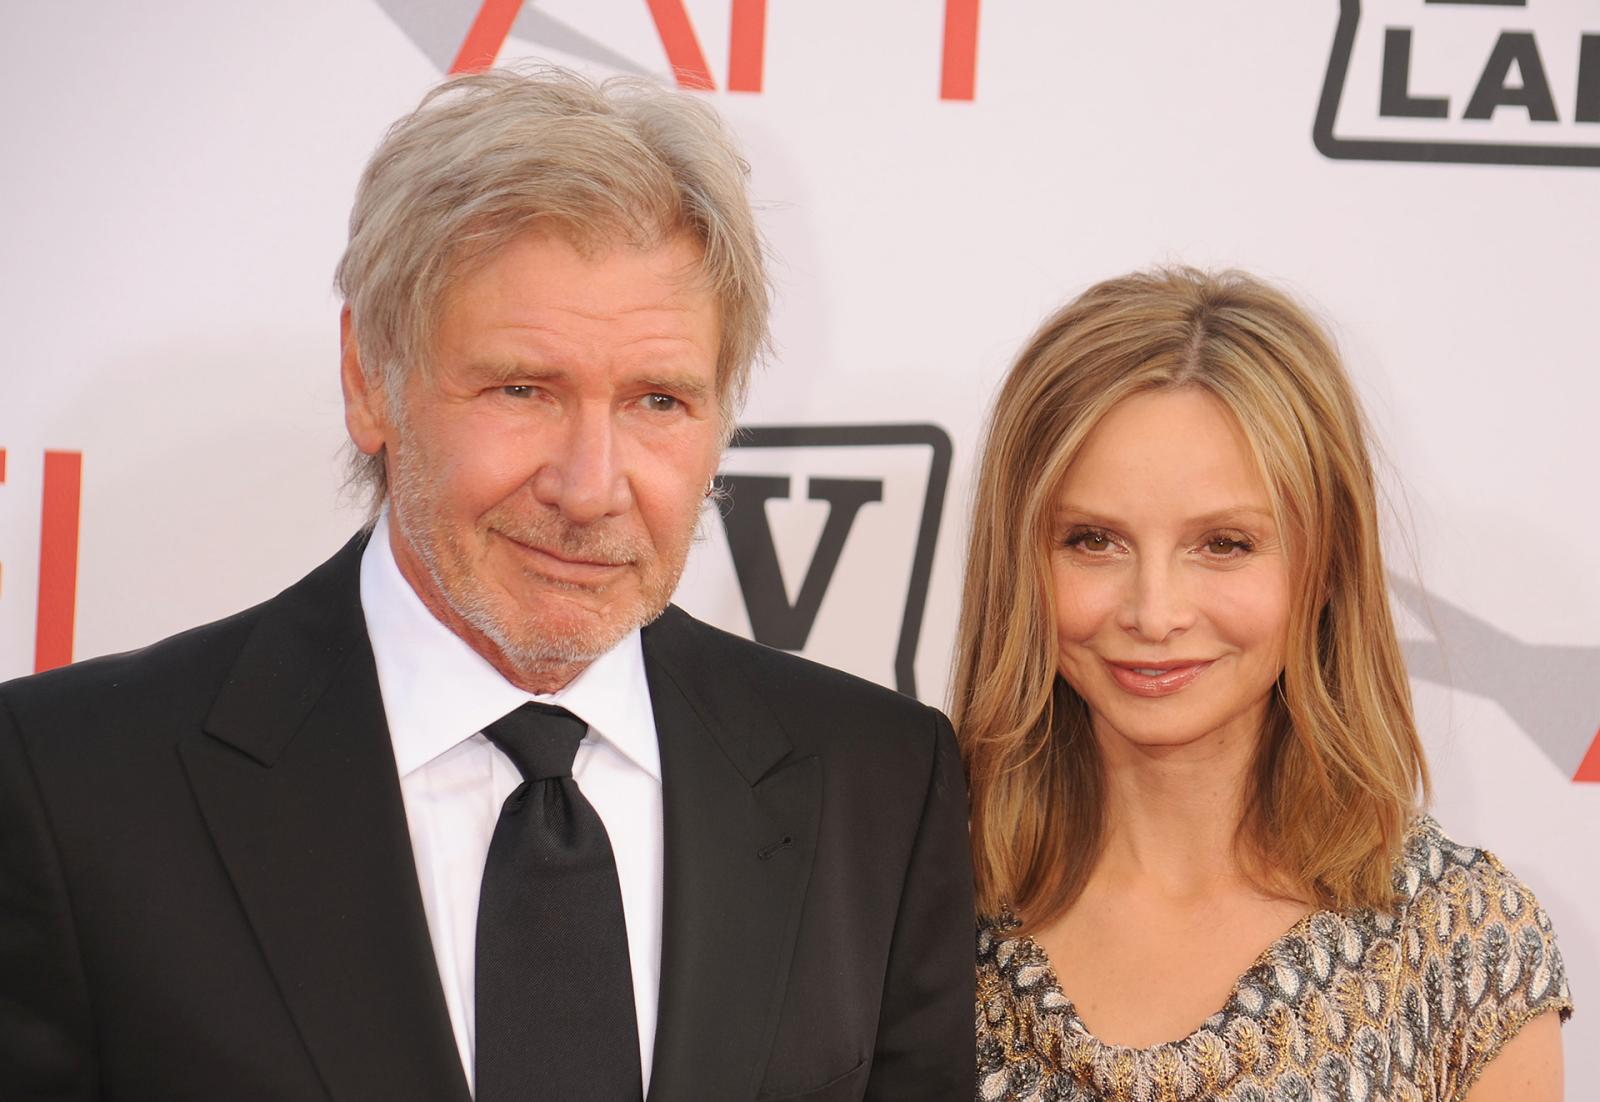 8 Famous Couples With Surprisingly Huge Age Gaps That Are Still Together - image 1